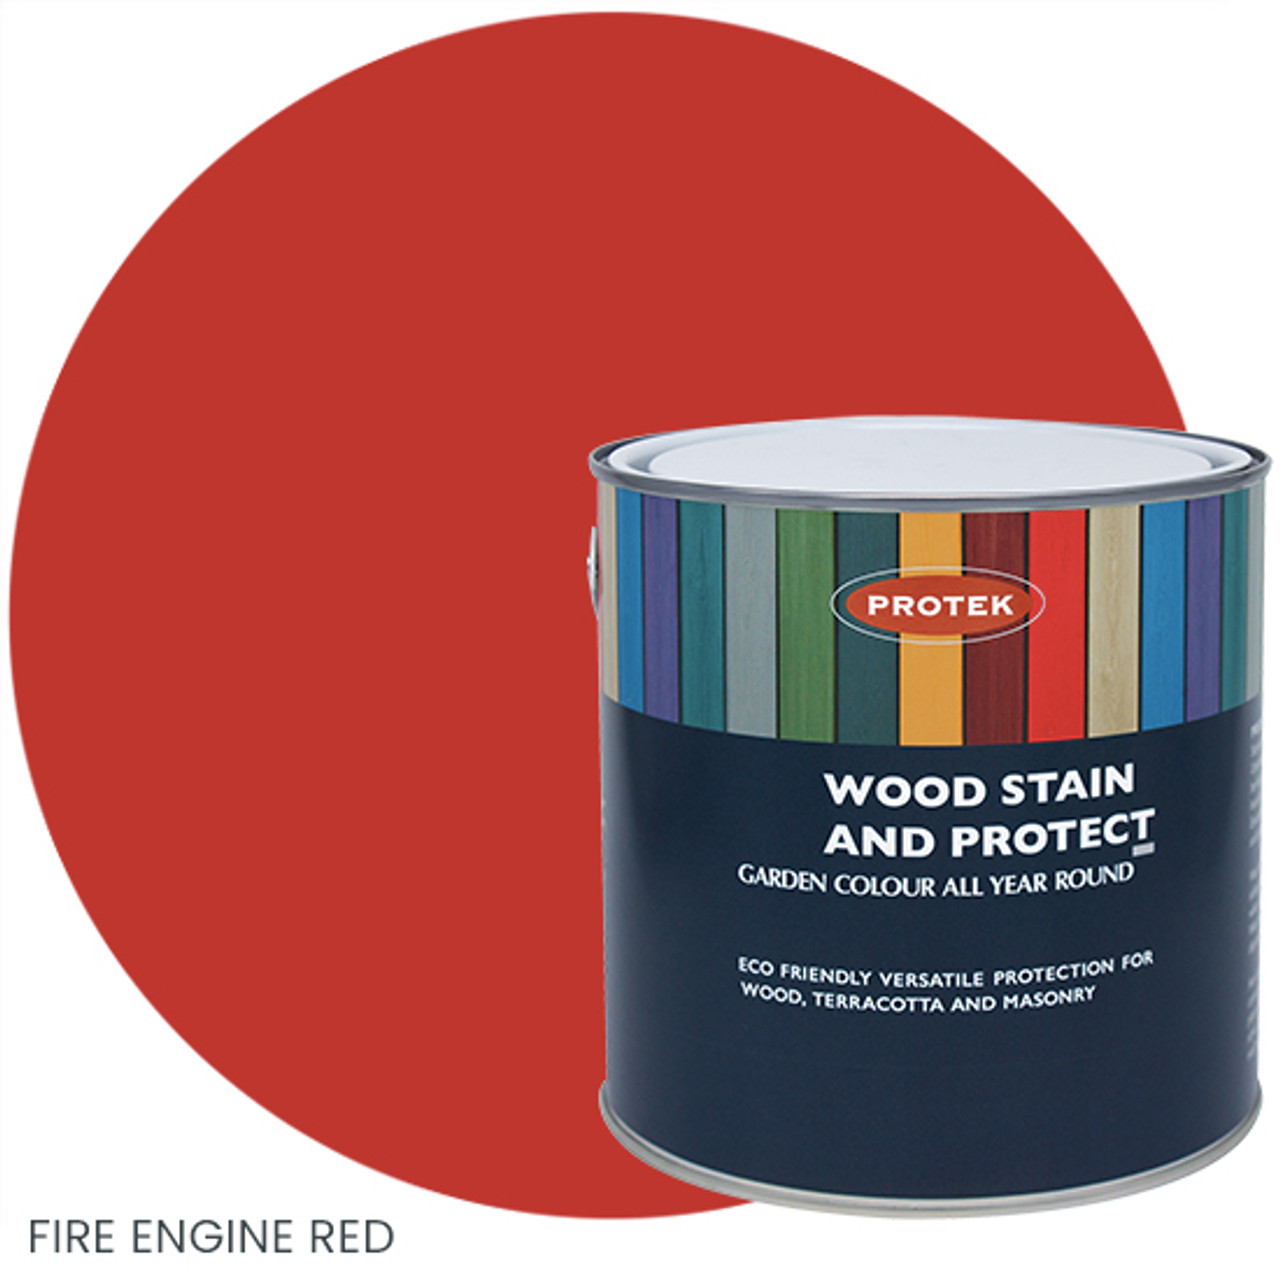 Bright Red Wood Stain - Protek Wood Stain